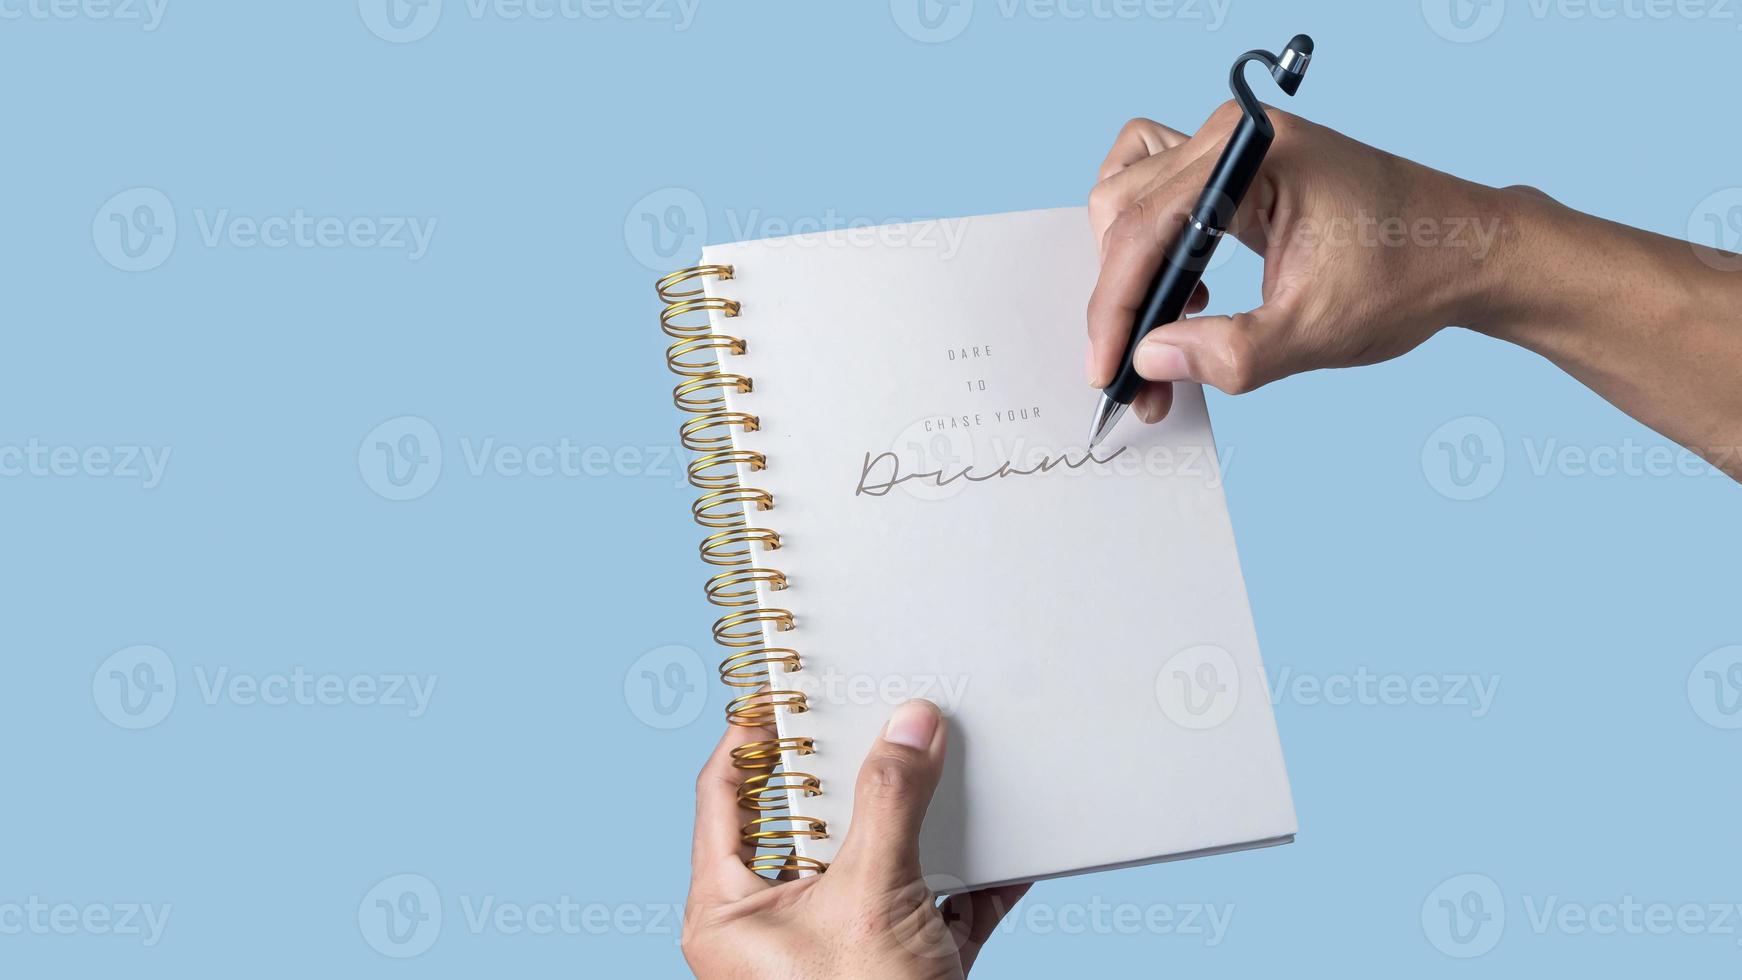 Man hand holding a pen and writing on a notebook isolated on blue background. photo